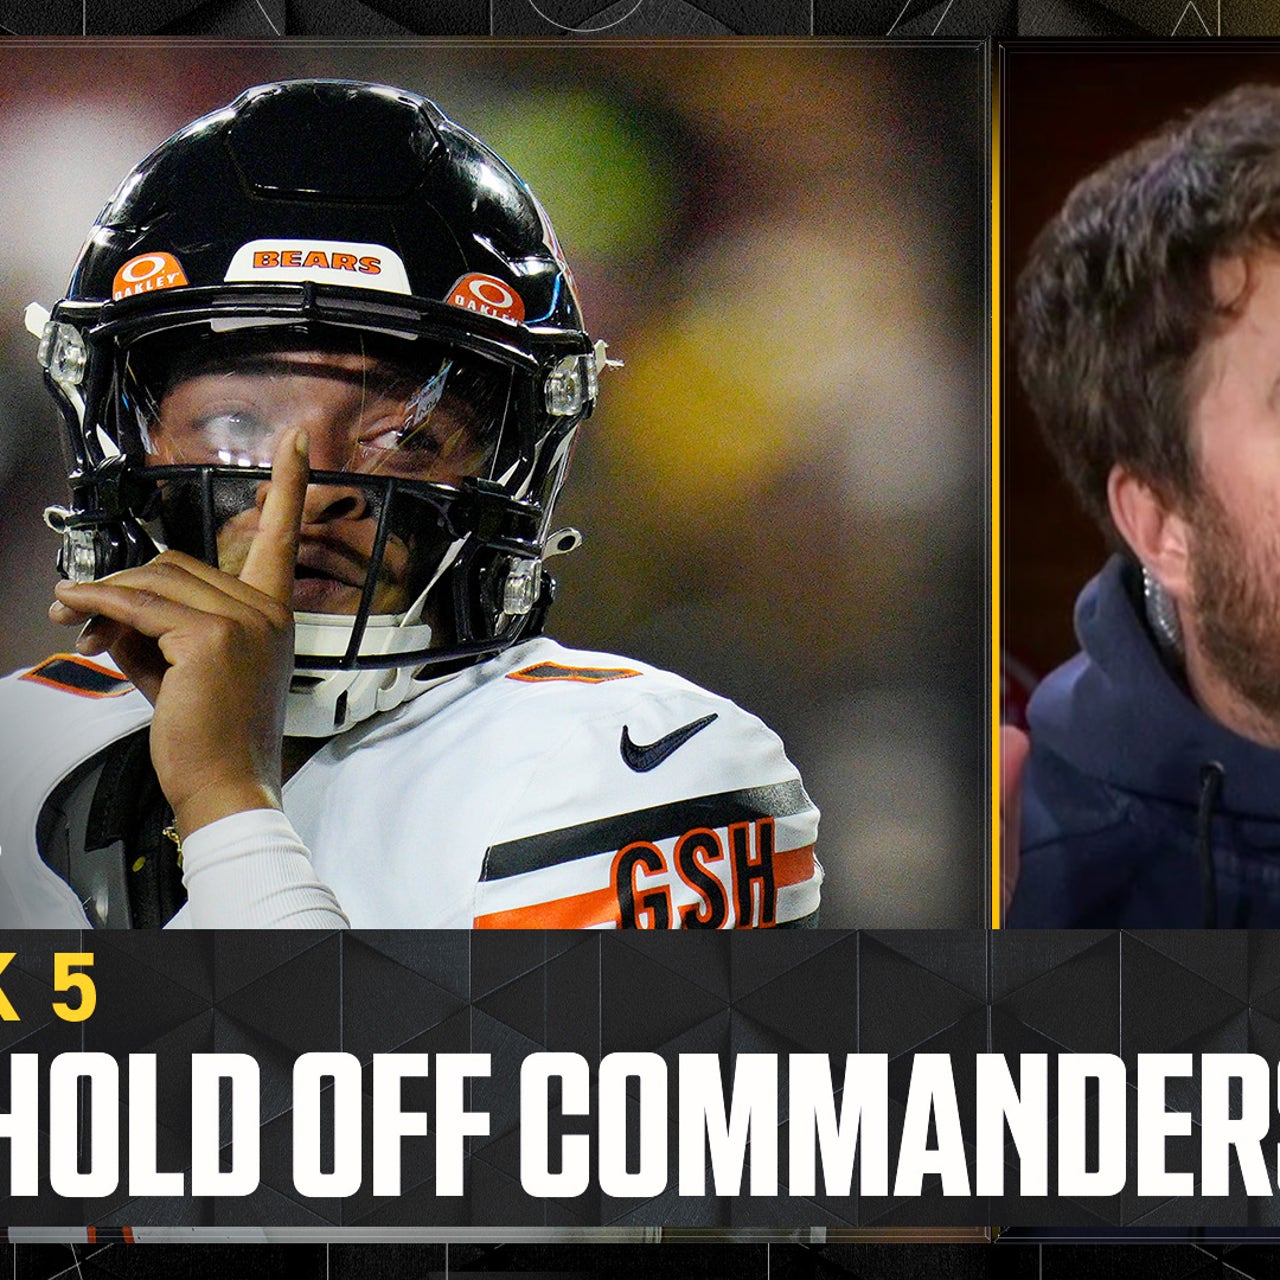 NFL games today: Bears at Commanders open Week 5 on Thursday Night Football